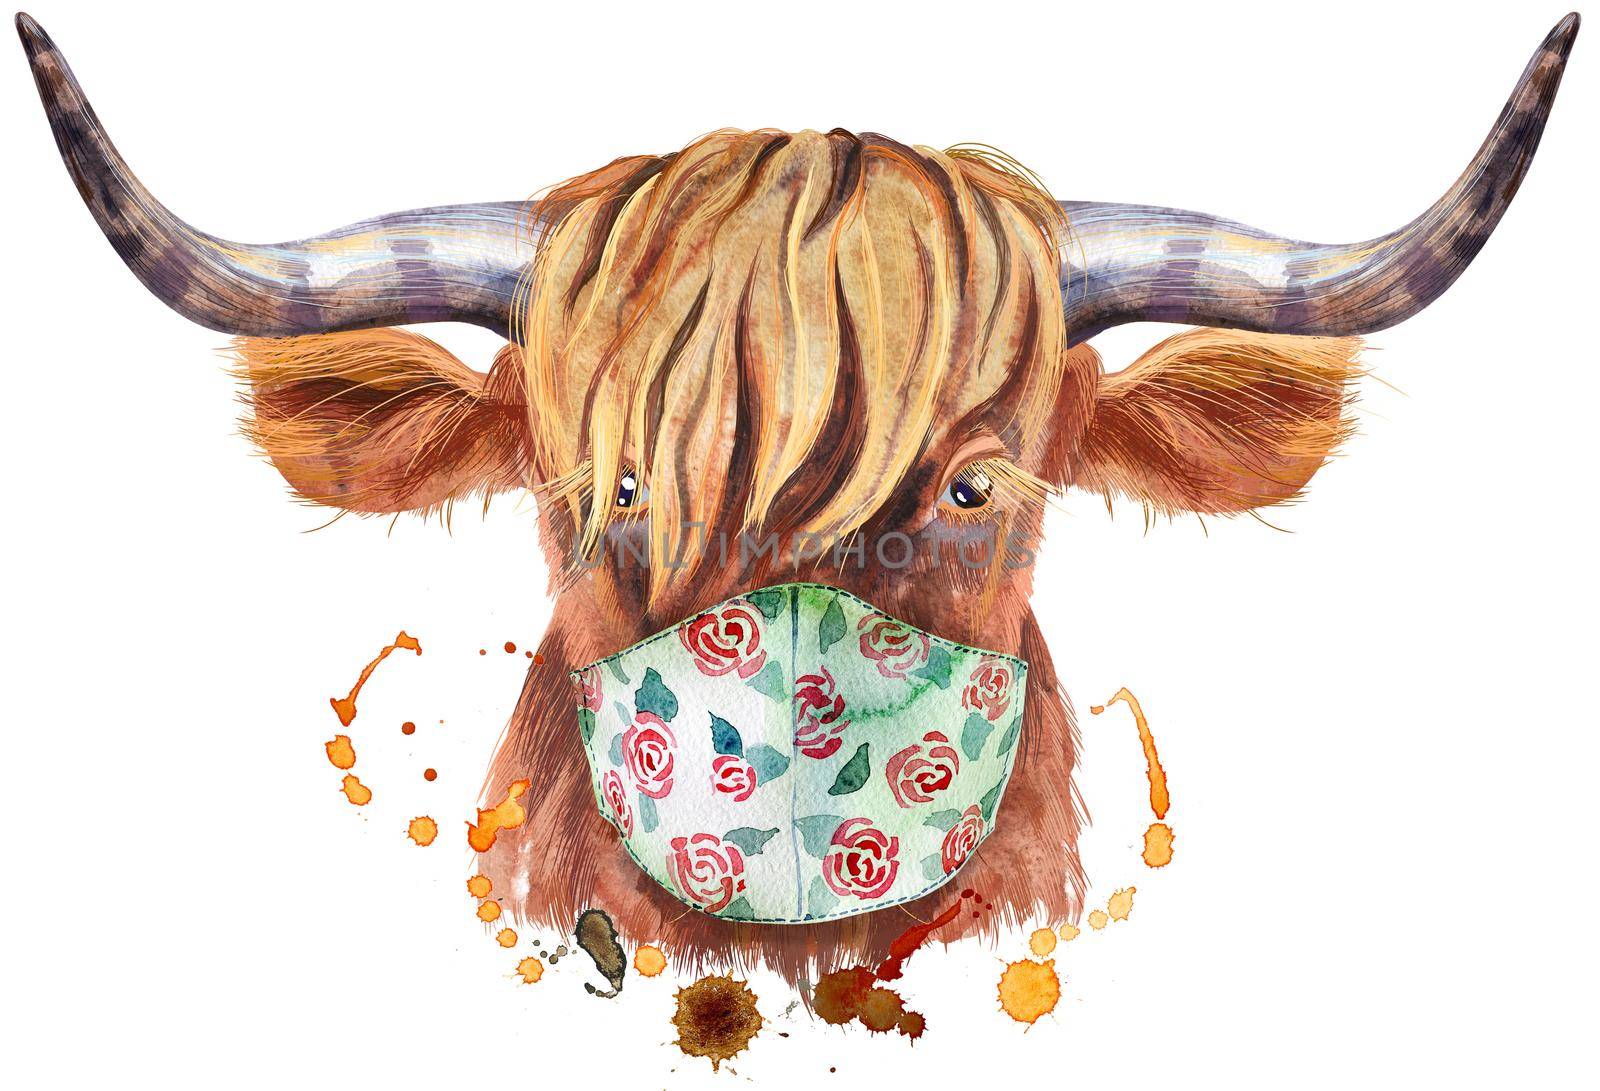 Bull watercolor graphics in protective mask. Bull animal illustration with splash watercolor textured background.